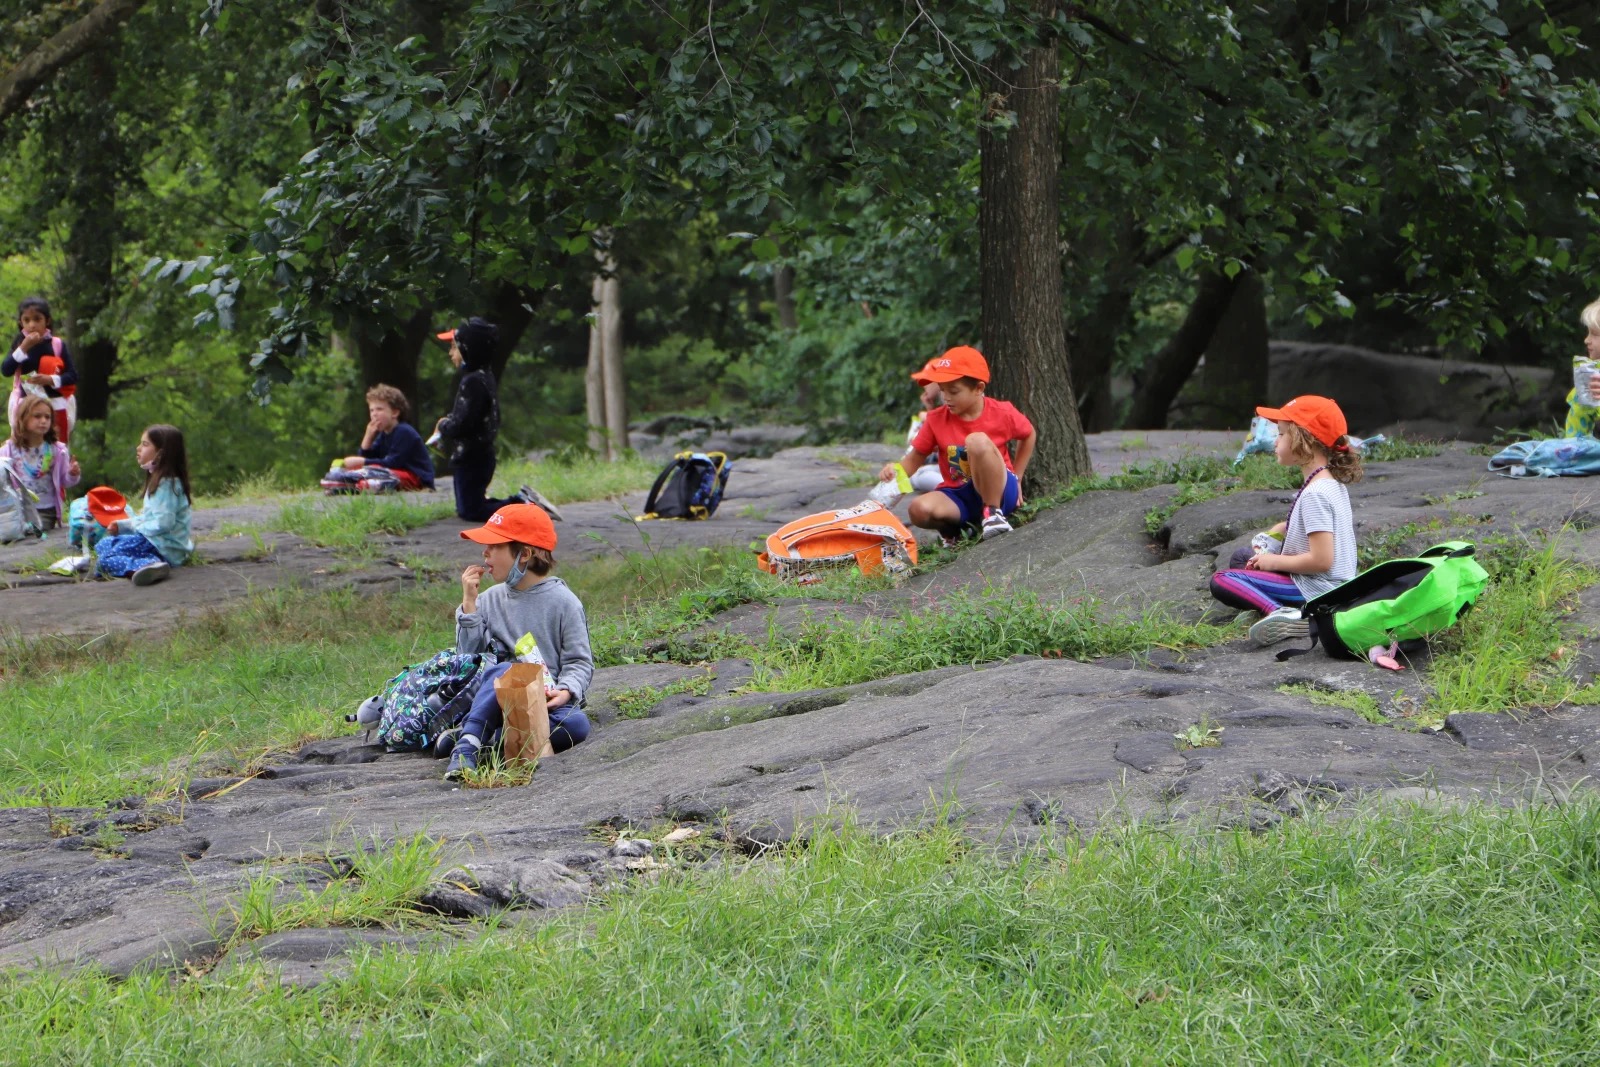 Students eat lunch outdoors in Central Park